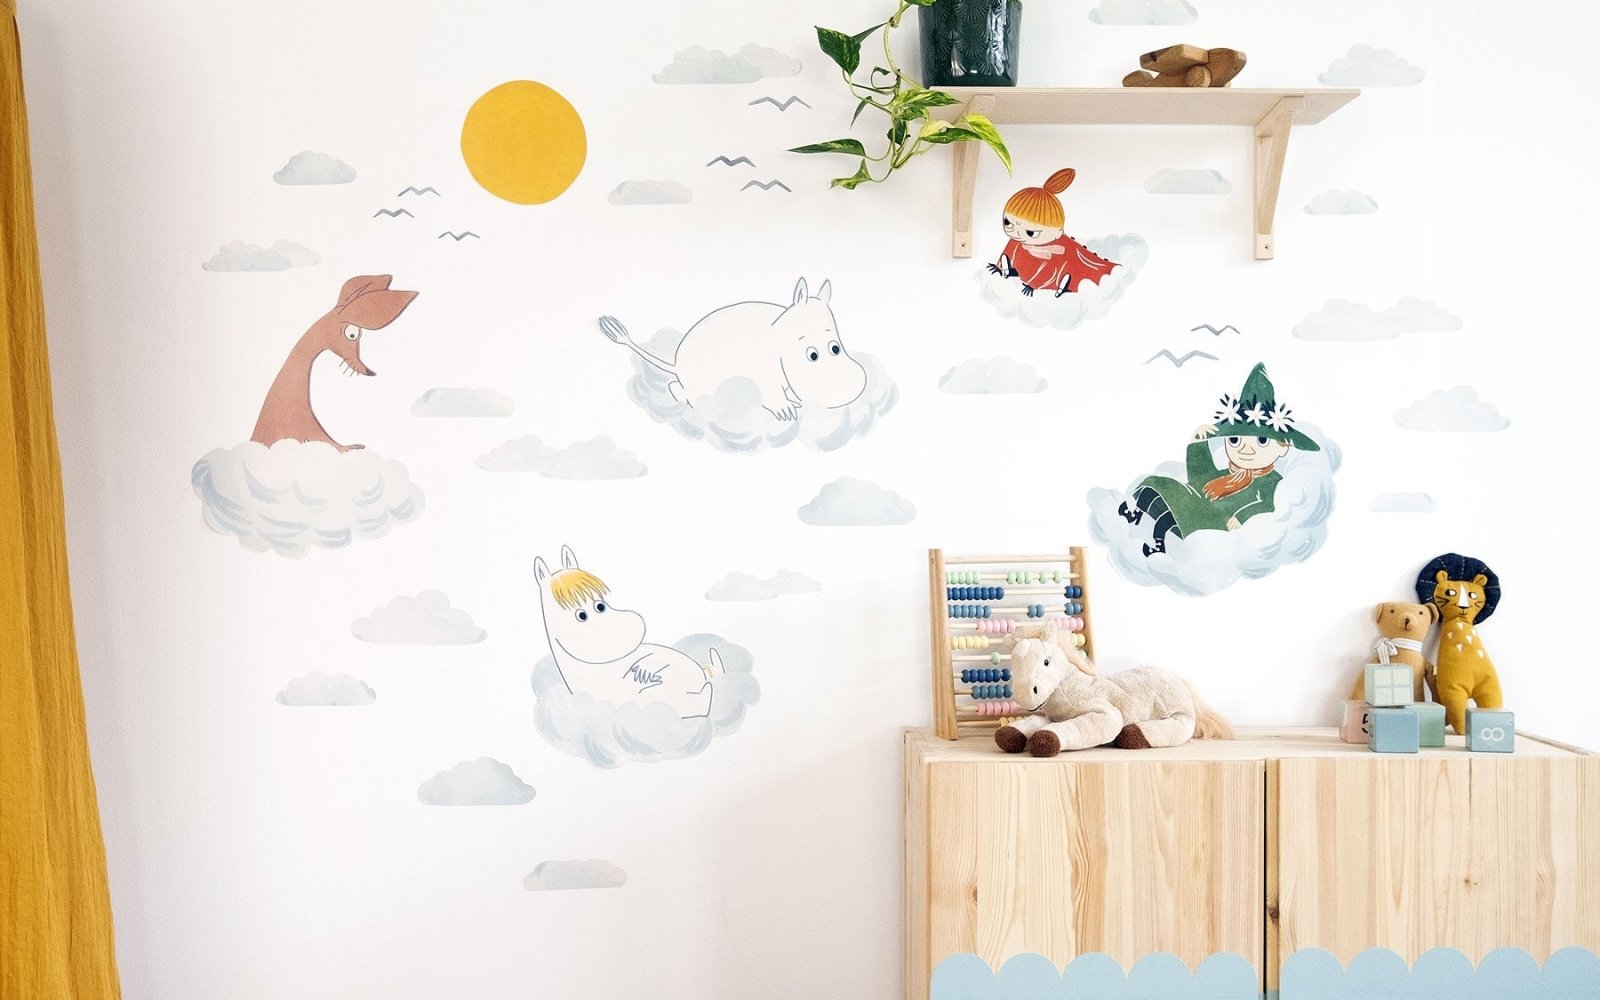 Make your own Moomin Valley with our new Moomin Wall Stickers - Made of Sundays